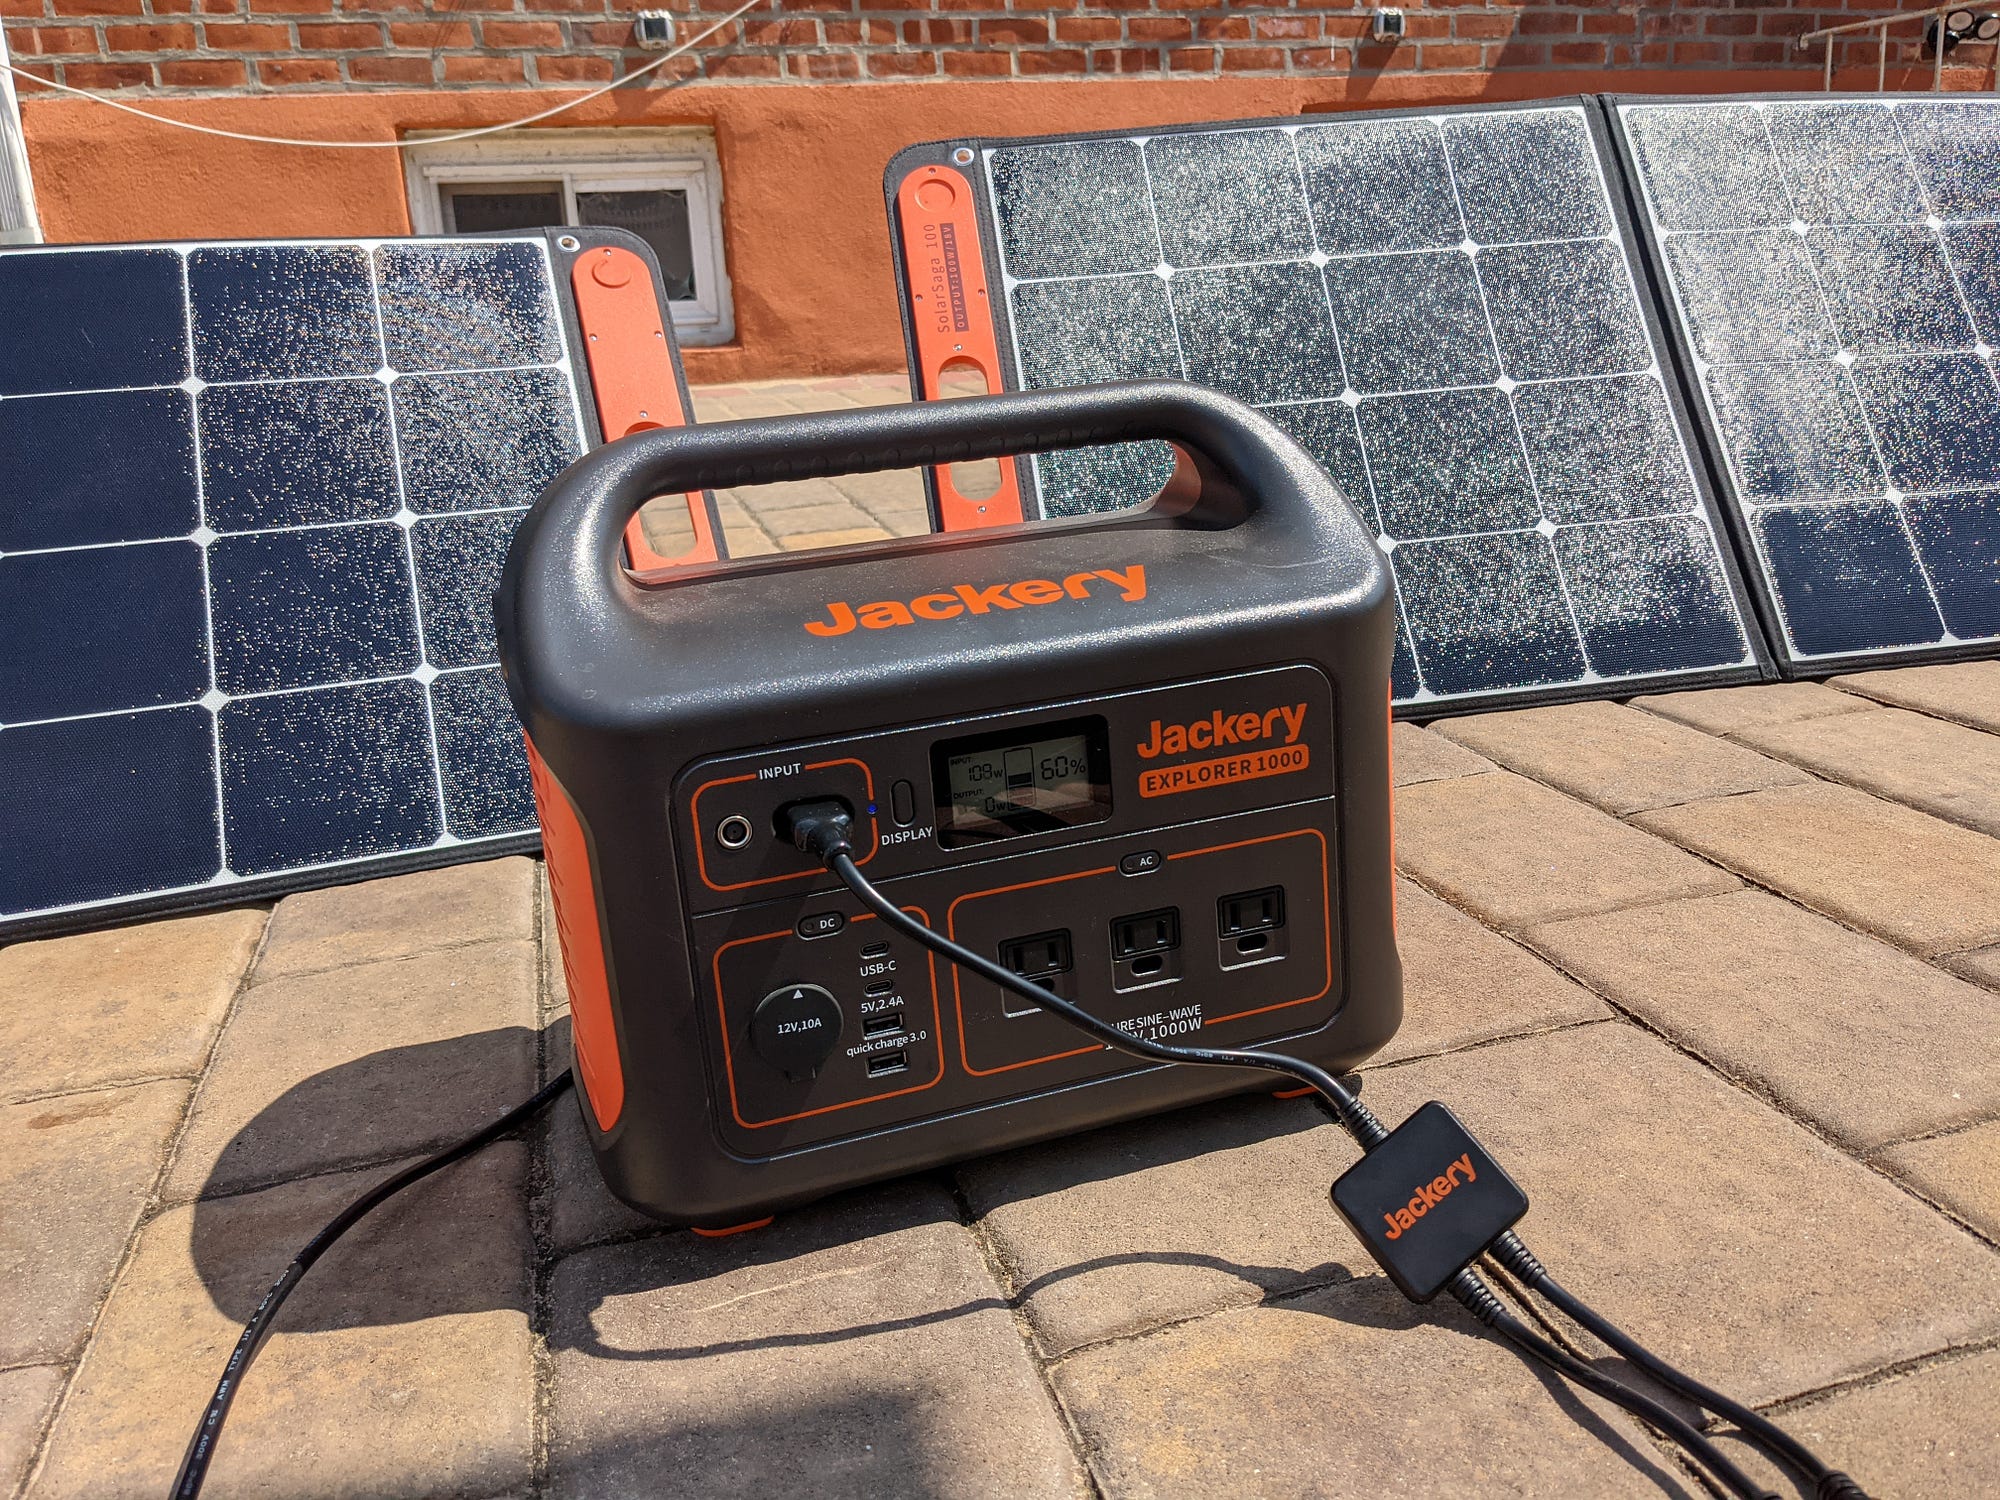 Jackery Explorer 1000W Portable Power Station Review: the new 'ol reliable  | by Stefan Etienne | LaptopMemo